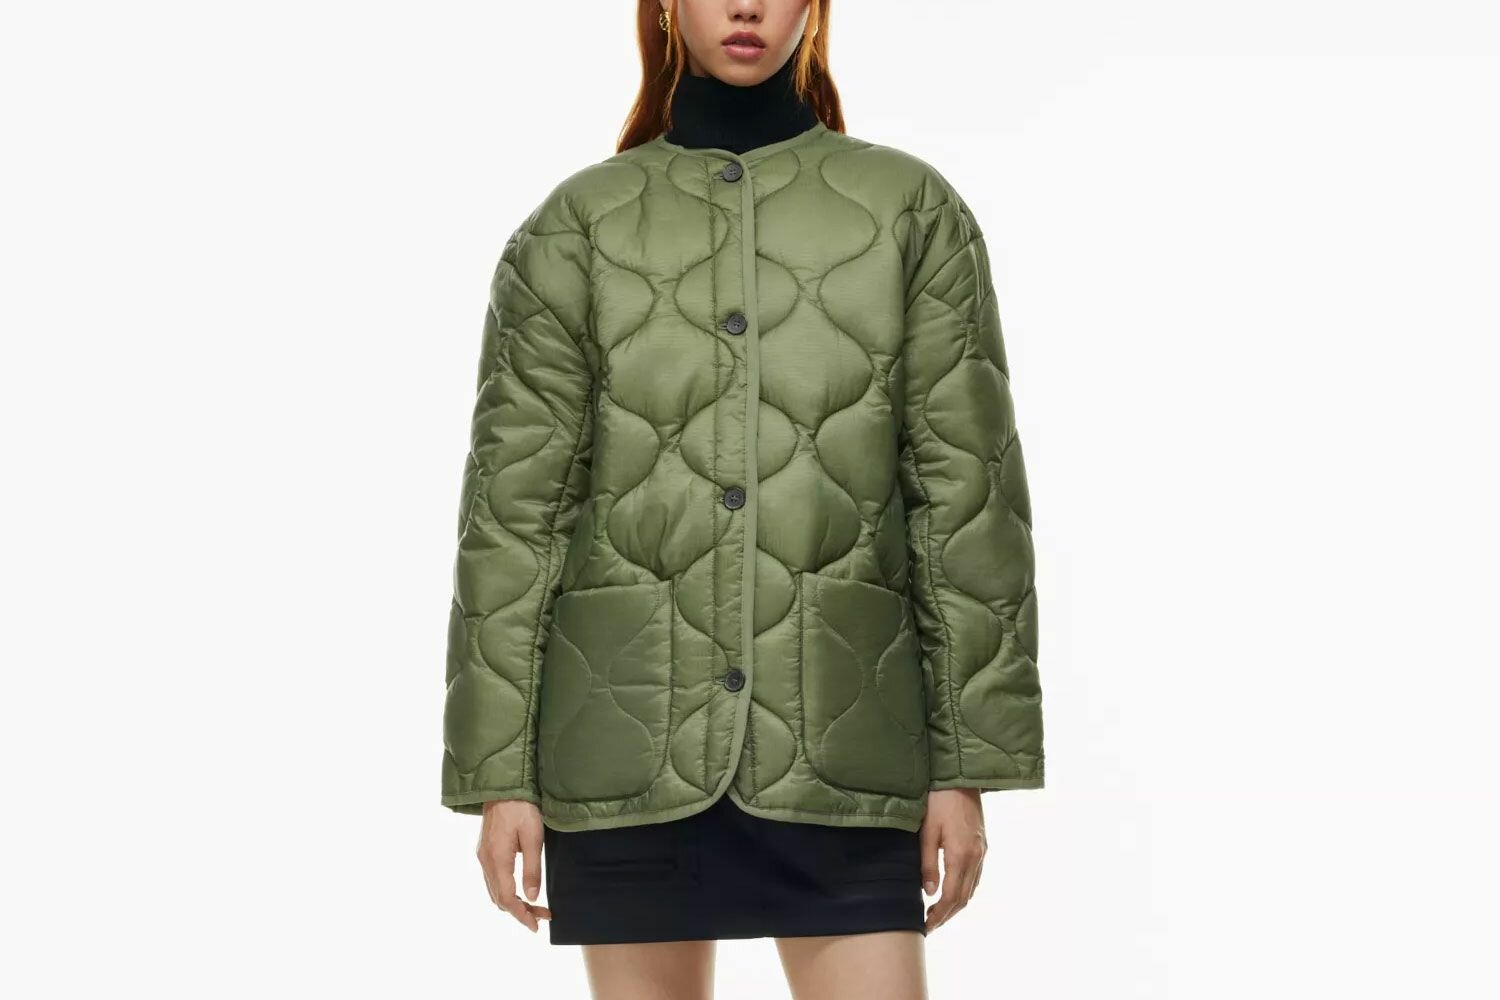 Aritzia Babaton Evergreen Quilted Jacket Quilted vegan down liner jacket